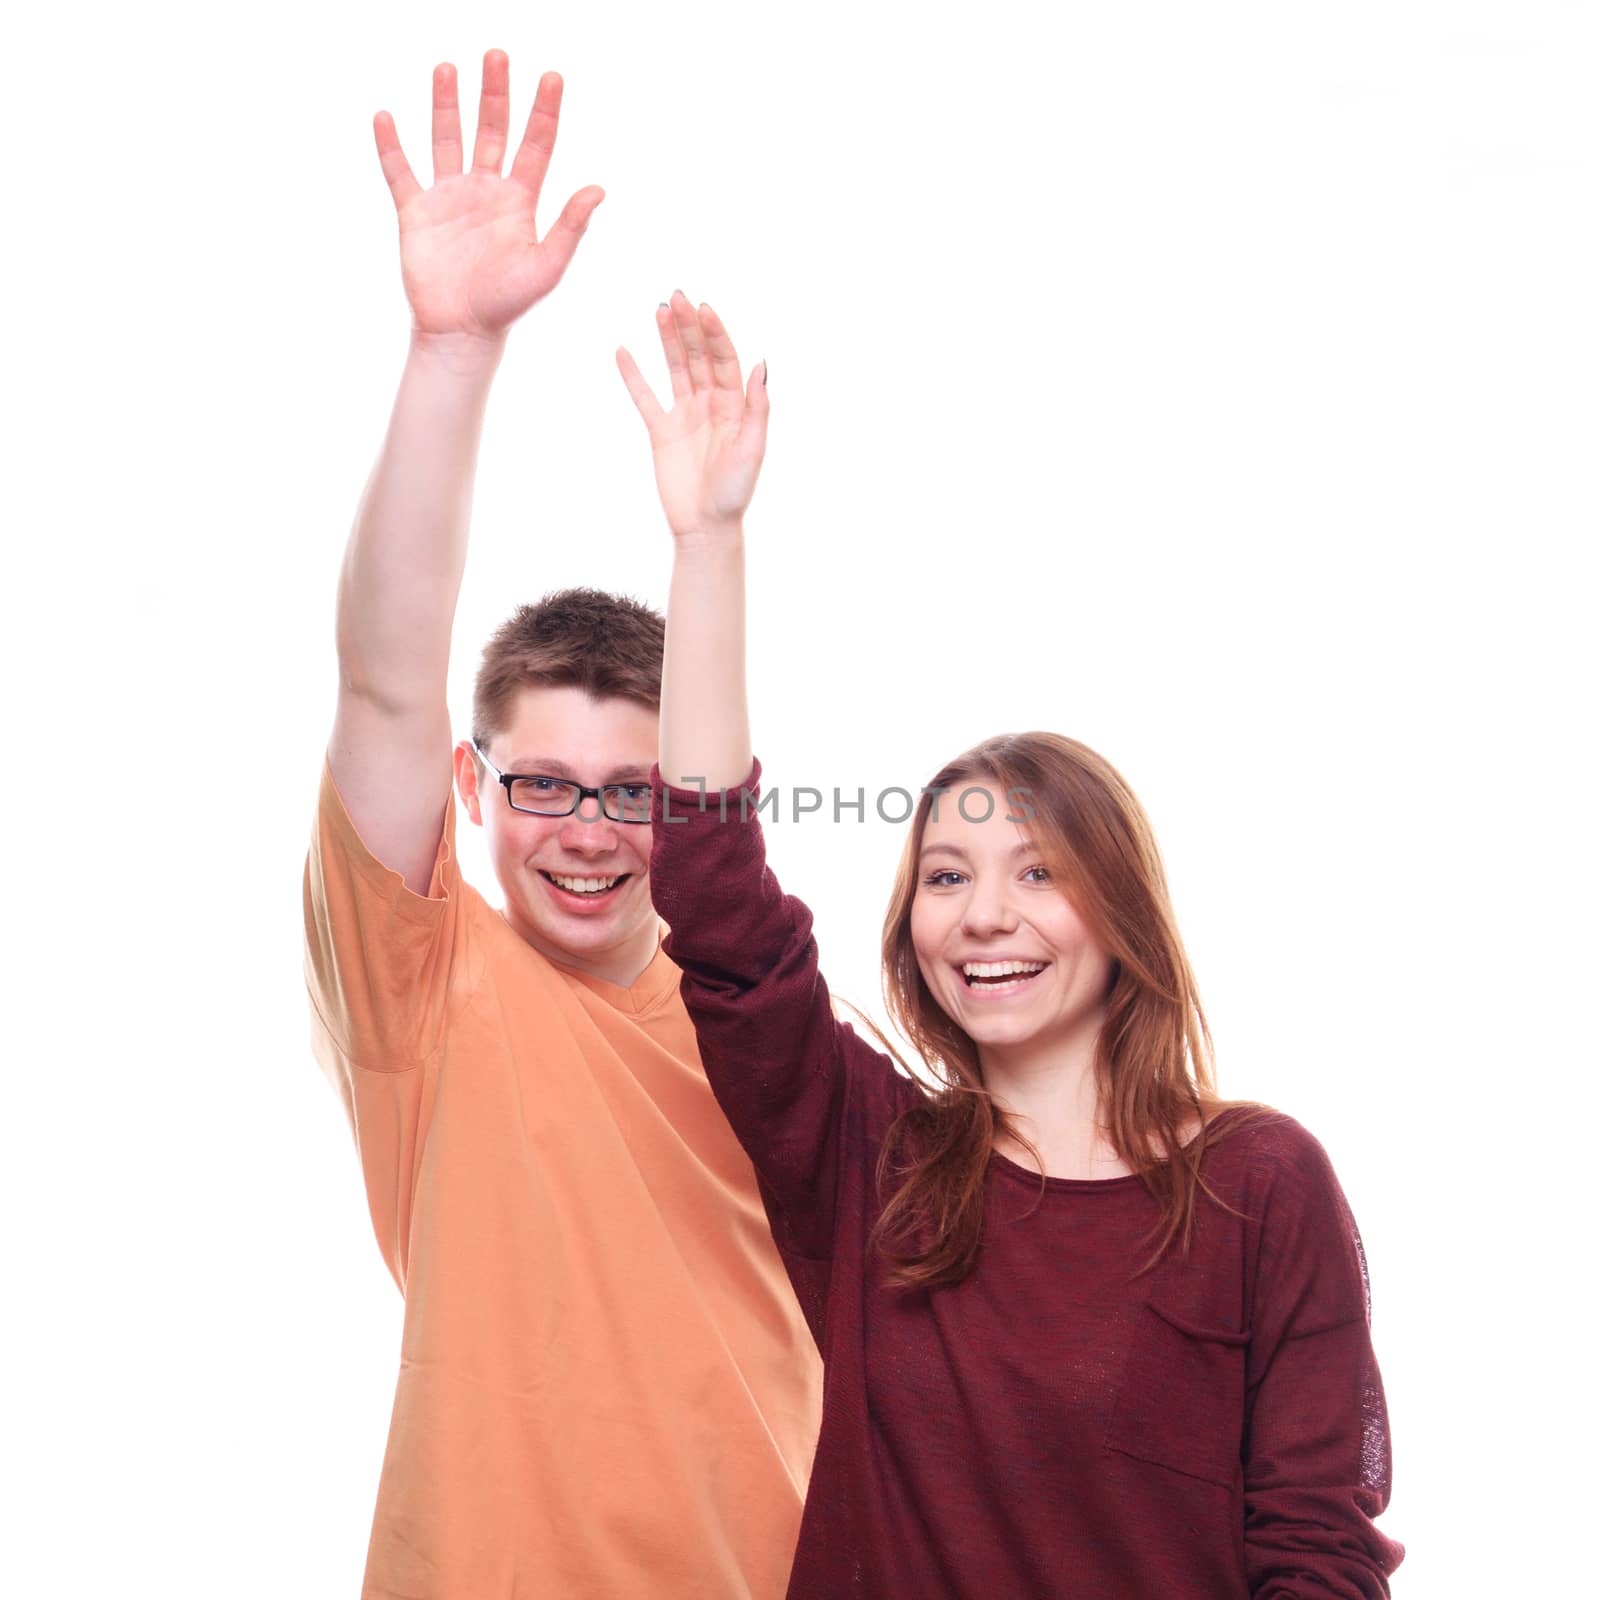 Boy and girl with hands up on white background  by MichalLudwiczak